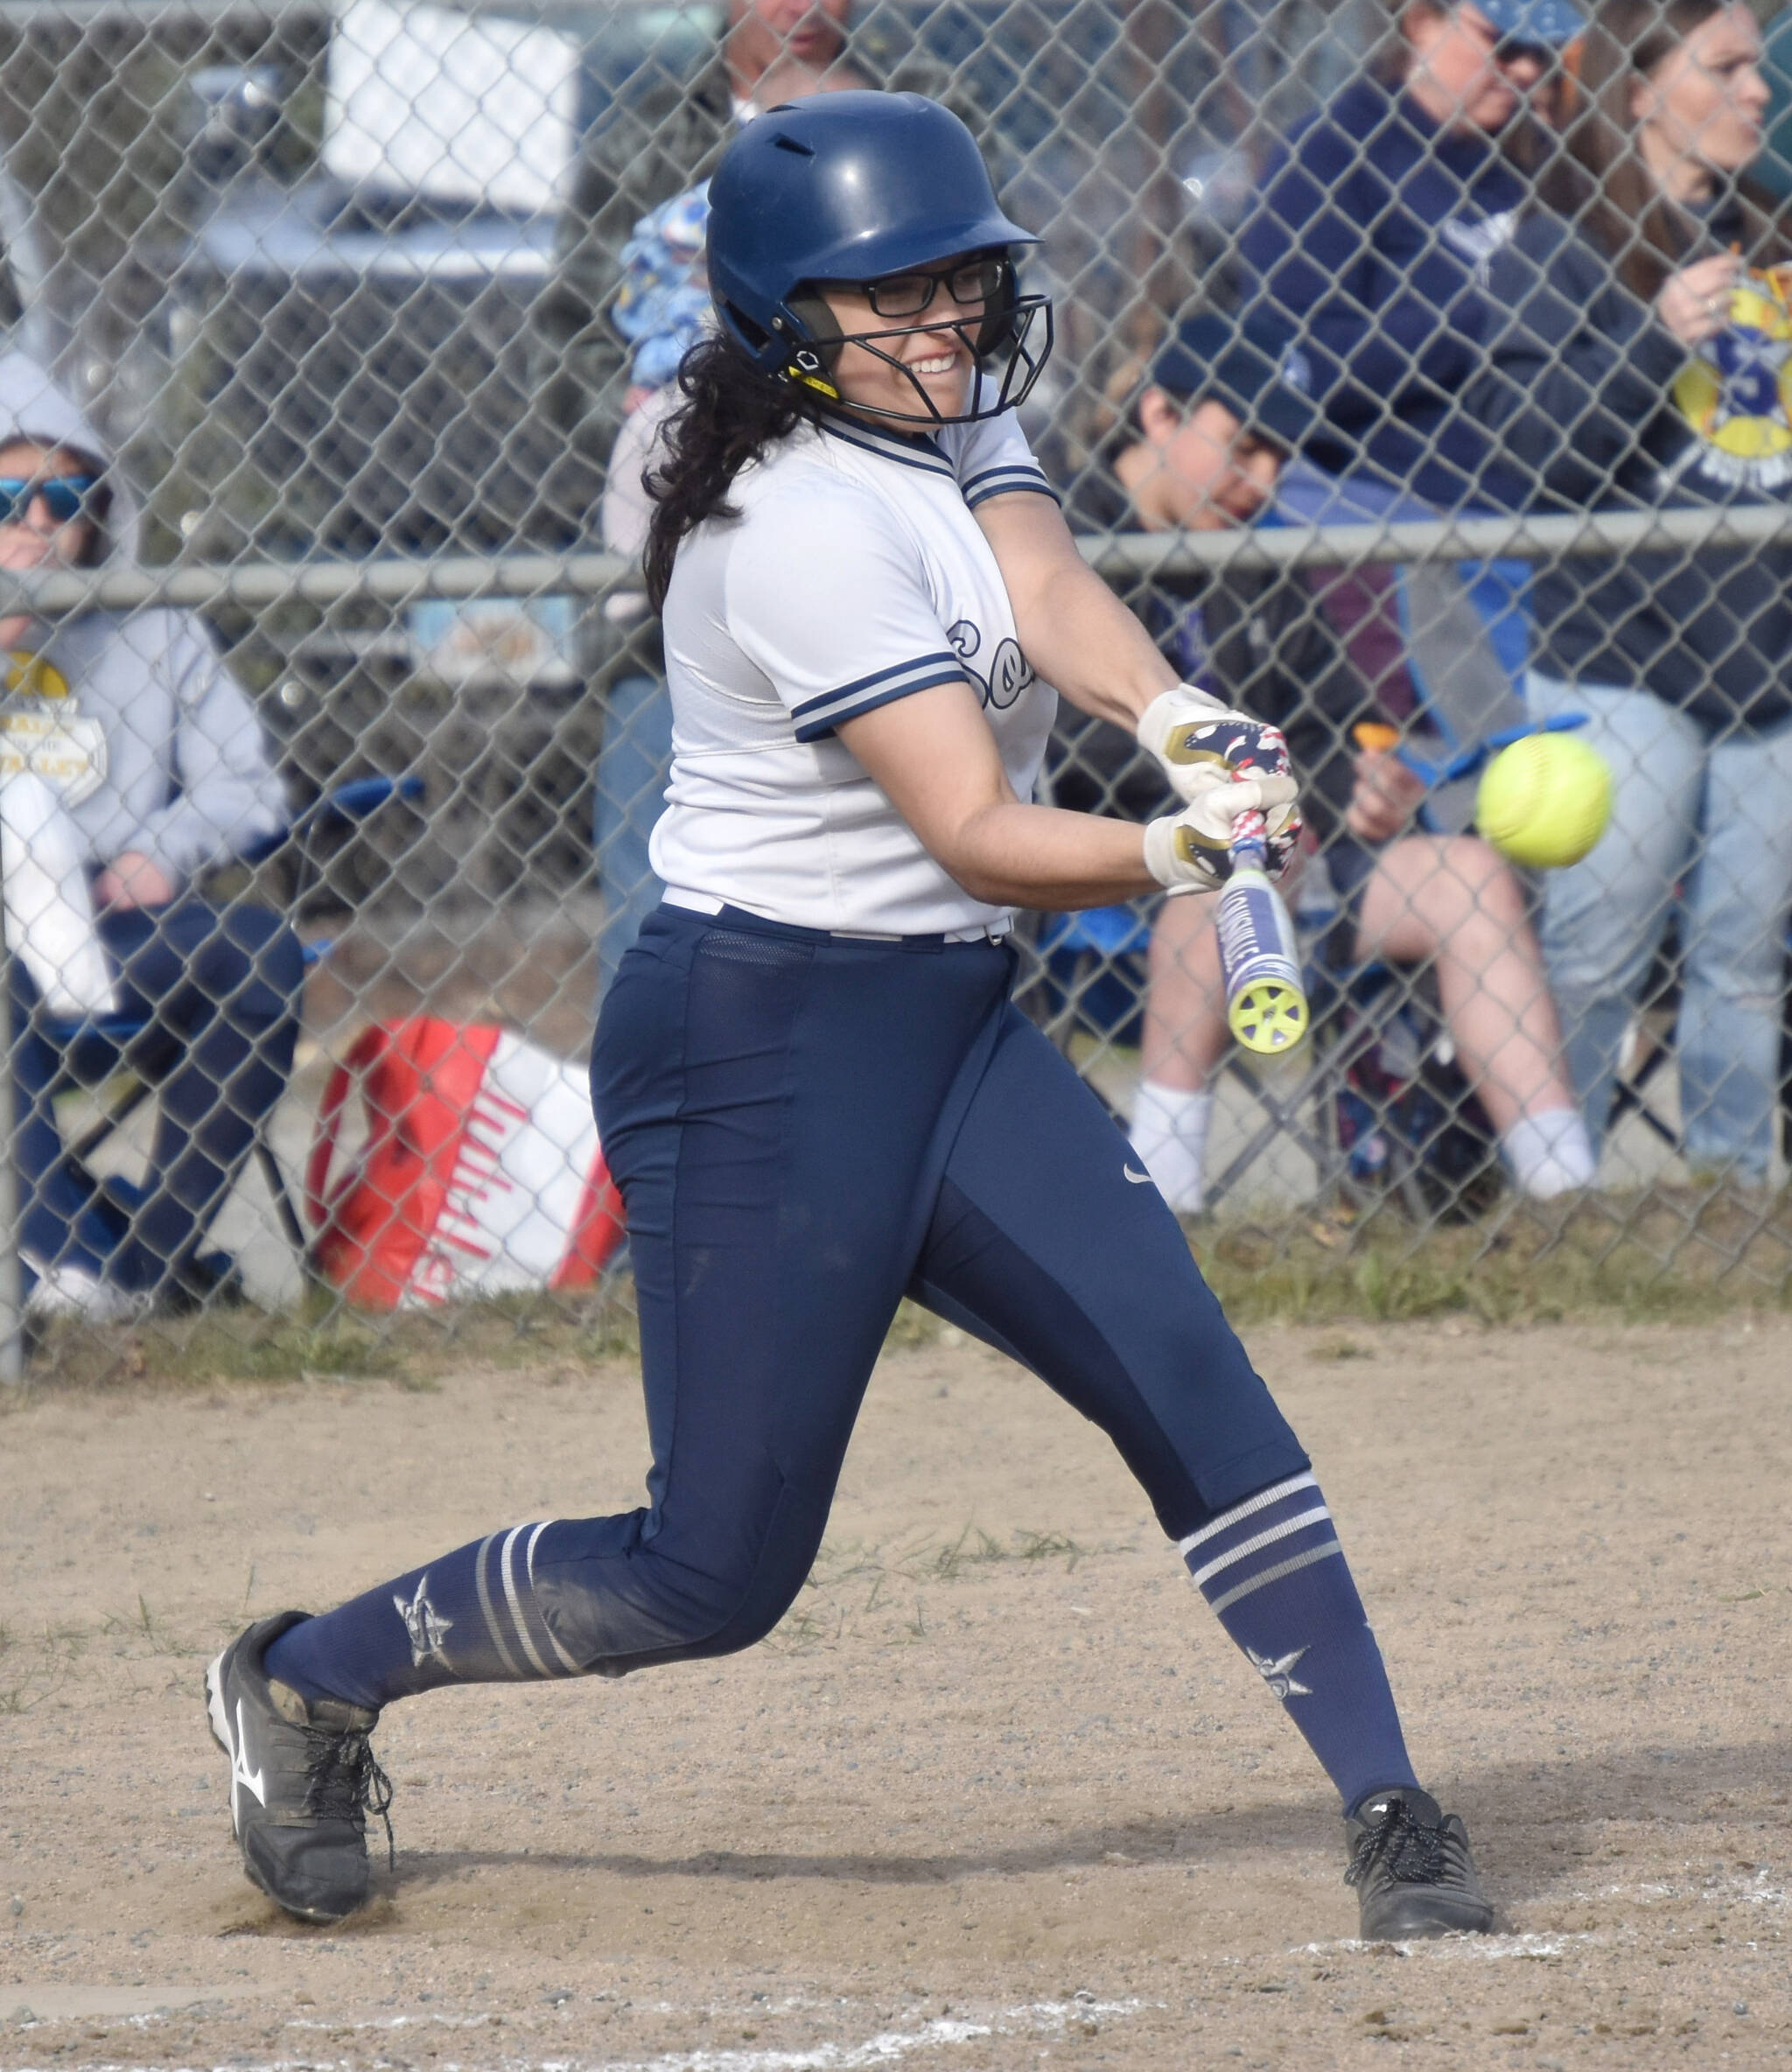 Soldotna’s Miah Mead lines out against Kenai Central on Thursday, May 18, 2023, at the Soldotna Little League fields in Soldotna, Alaska. (Photo by Jeff Helminiak/Peninsula Clarion)